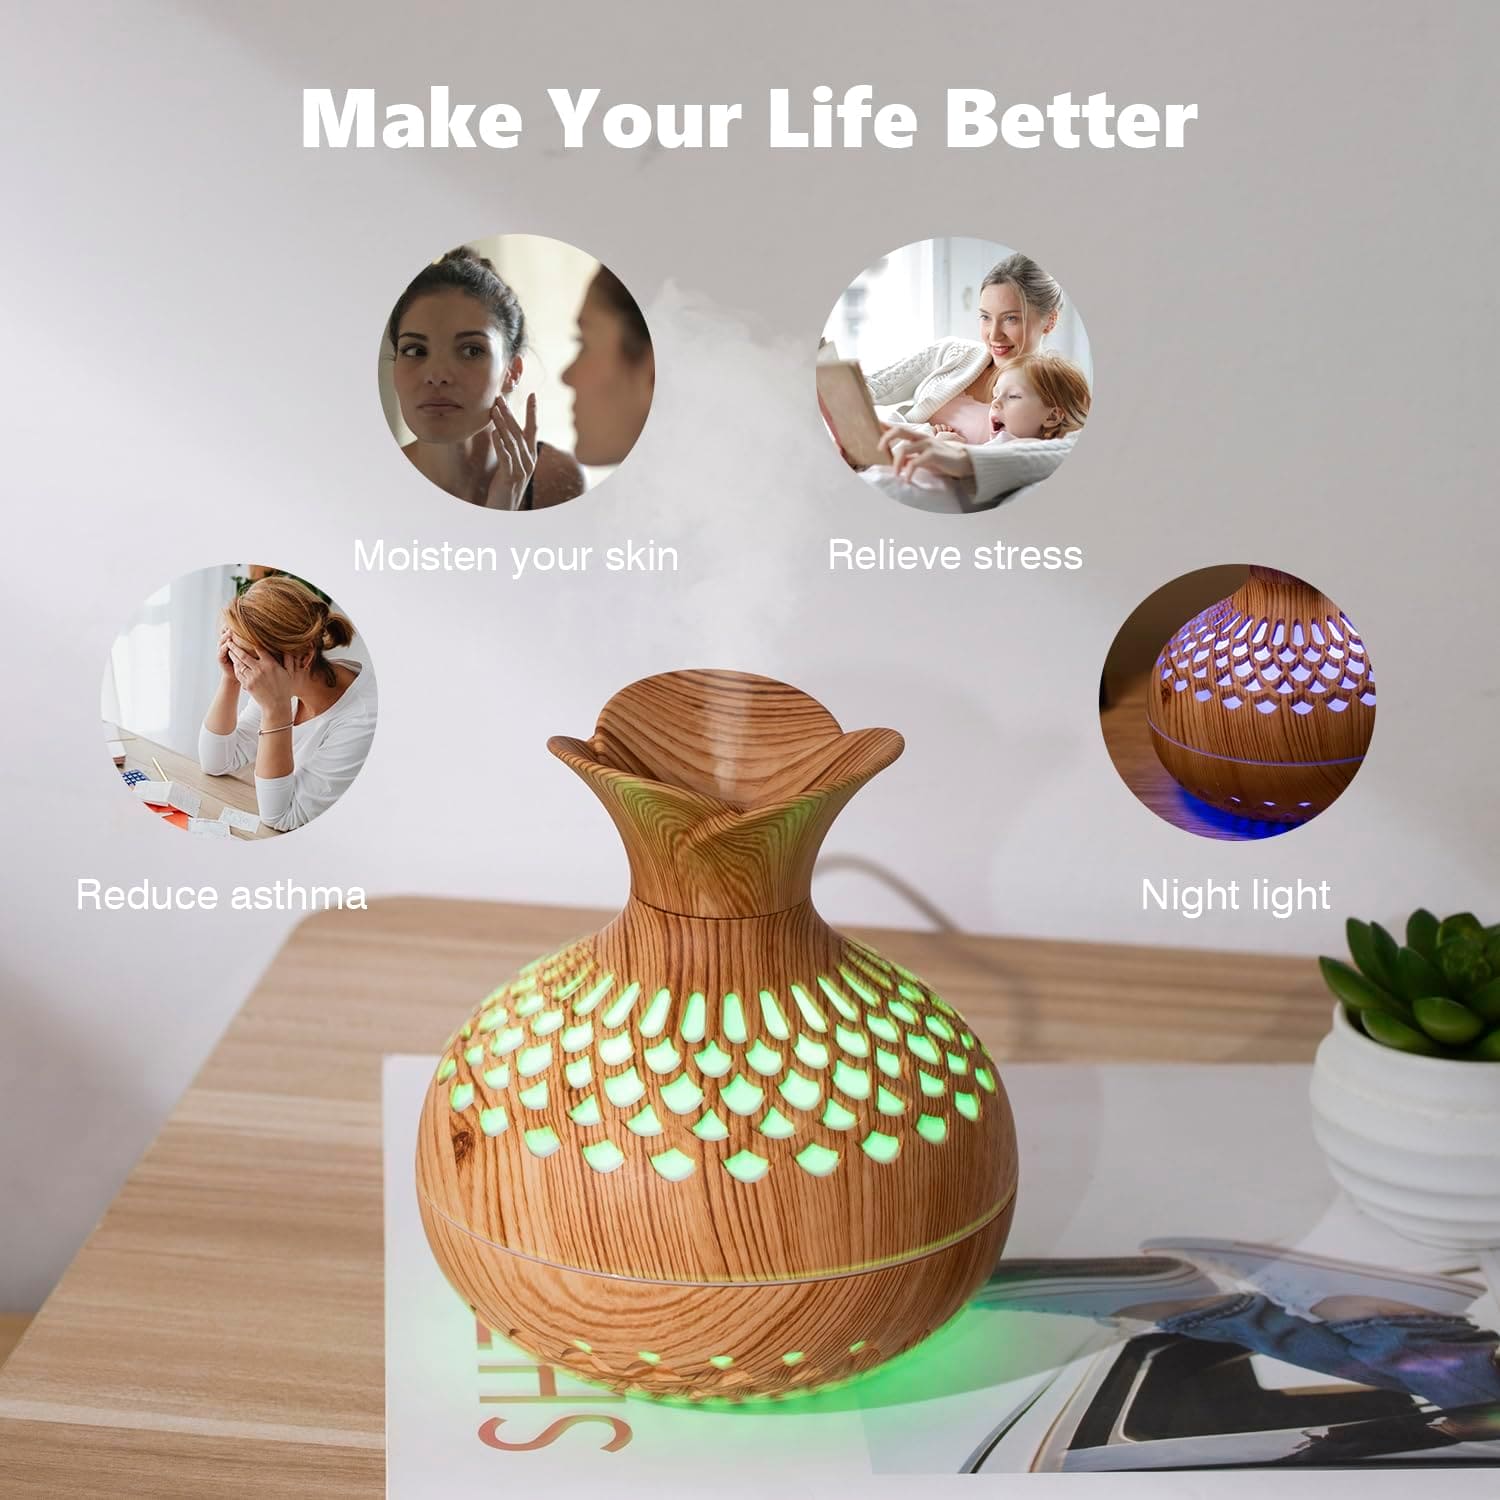 Mini Vase Air Humidifier, Wood Grain Flower Humidifier, 300ml USB Aroma Diffuser,  Electric Ultrasonic Water Aroma Essential Oil Diffuser, Home Room Fragrance Air Purifier, 7 Color Portable Cool Mist Humidifier